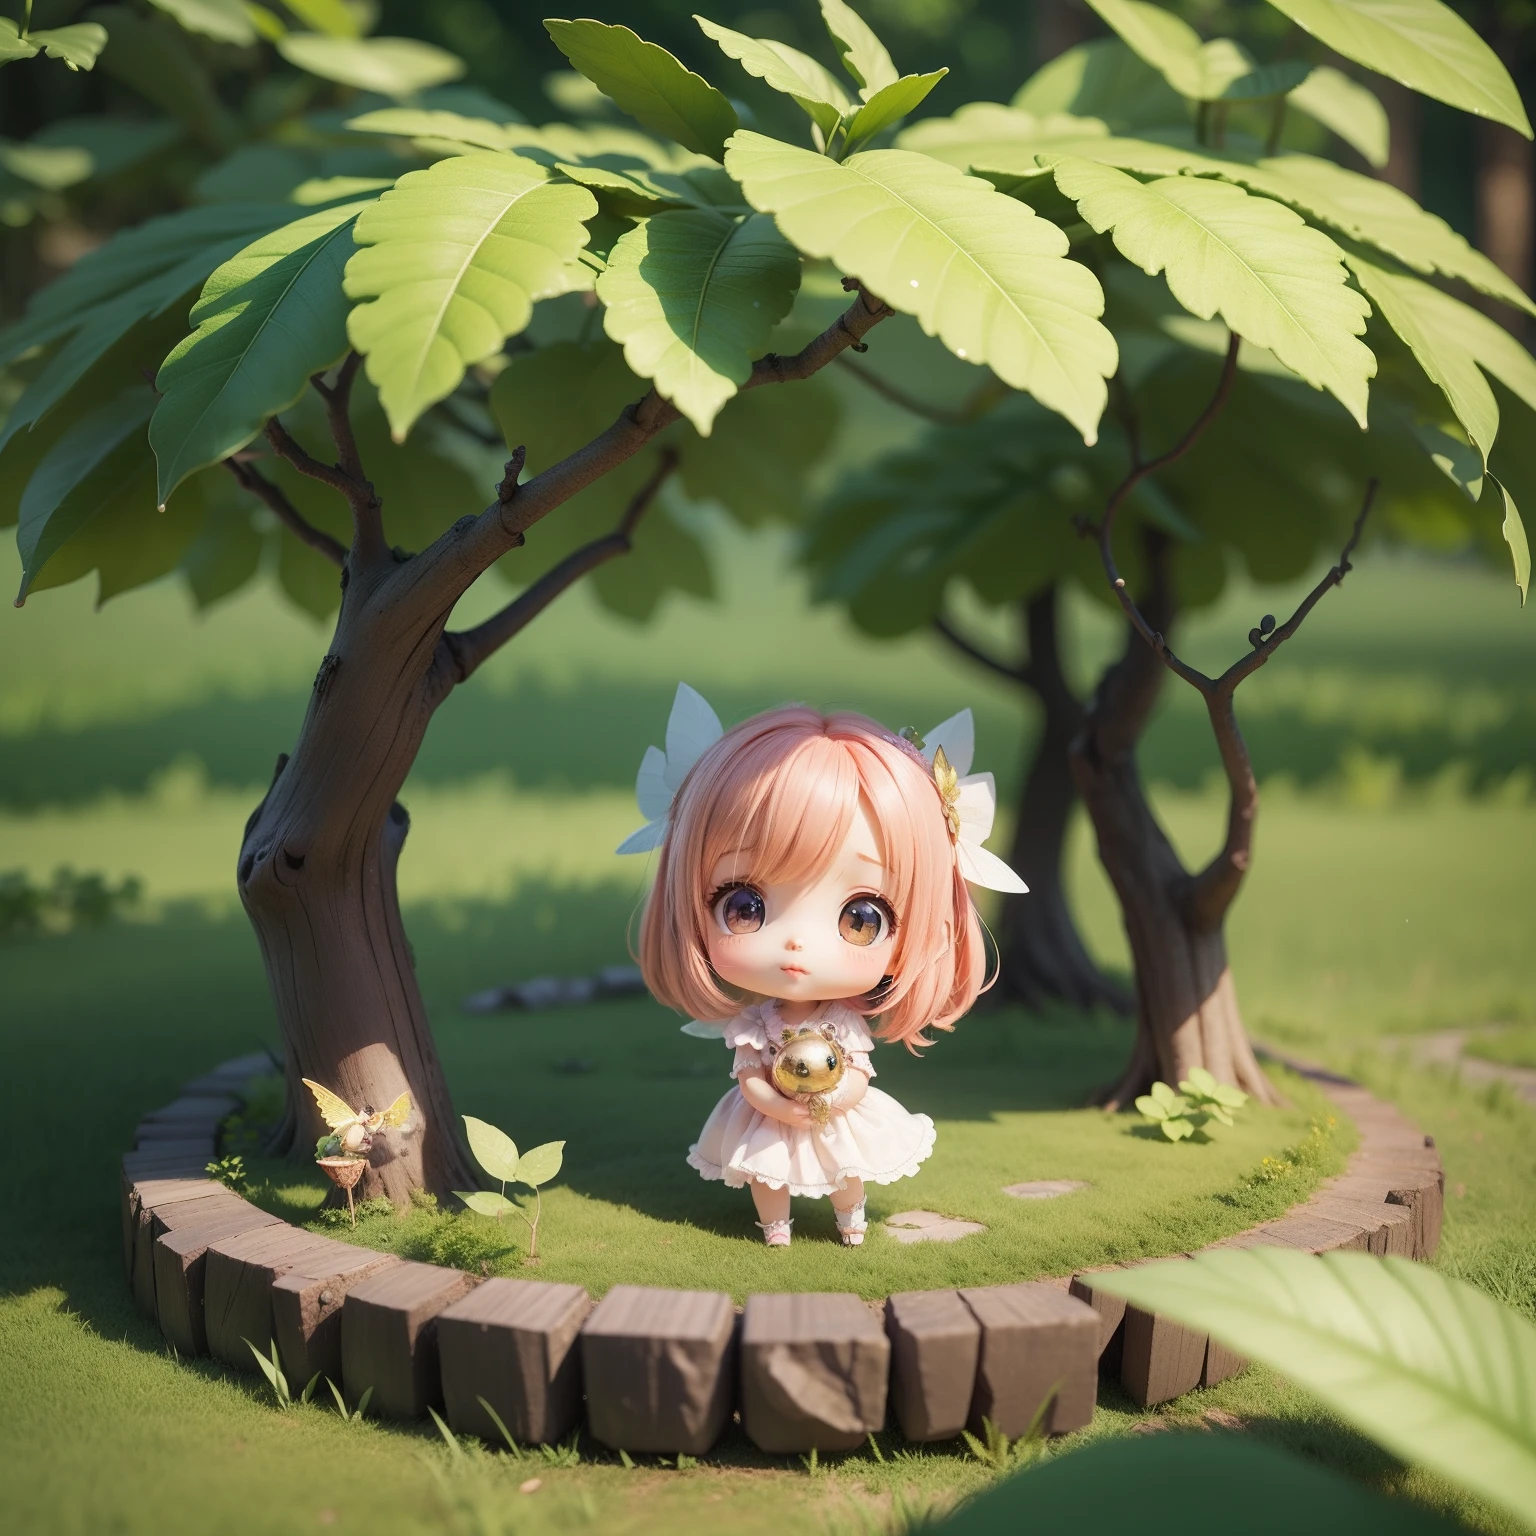 Cute Baby Chibi Anime,(((chibi 3d))) (Best Quality) (Master Price)、Chibi Fairy、fairy tale forest、shelter from the rain with large leaves,、Looking Up